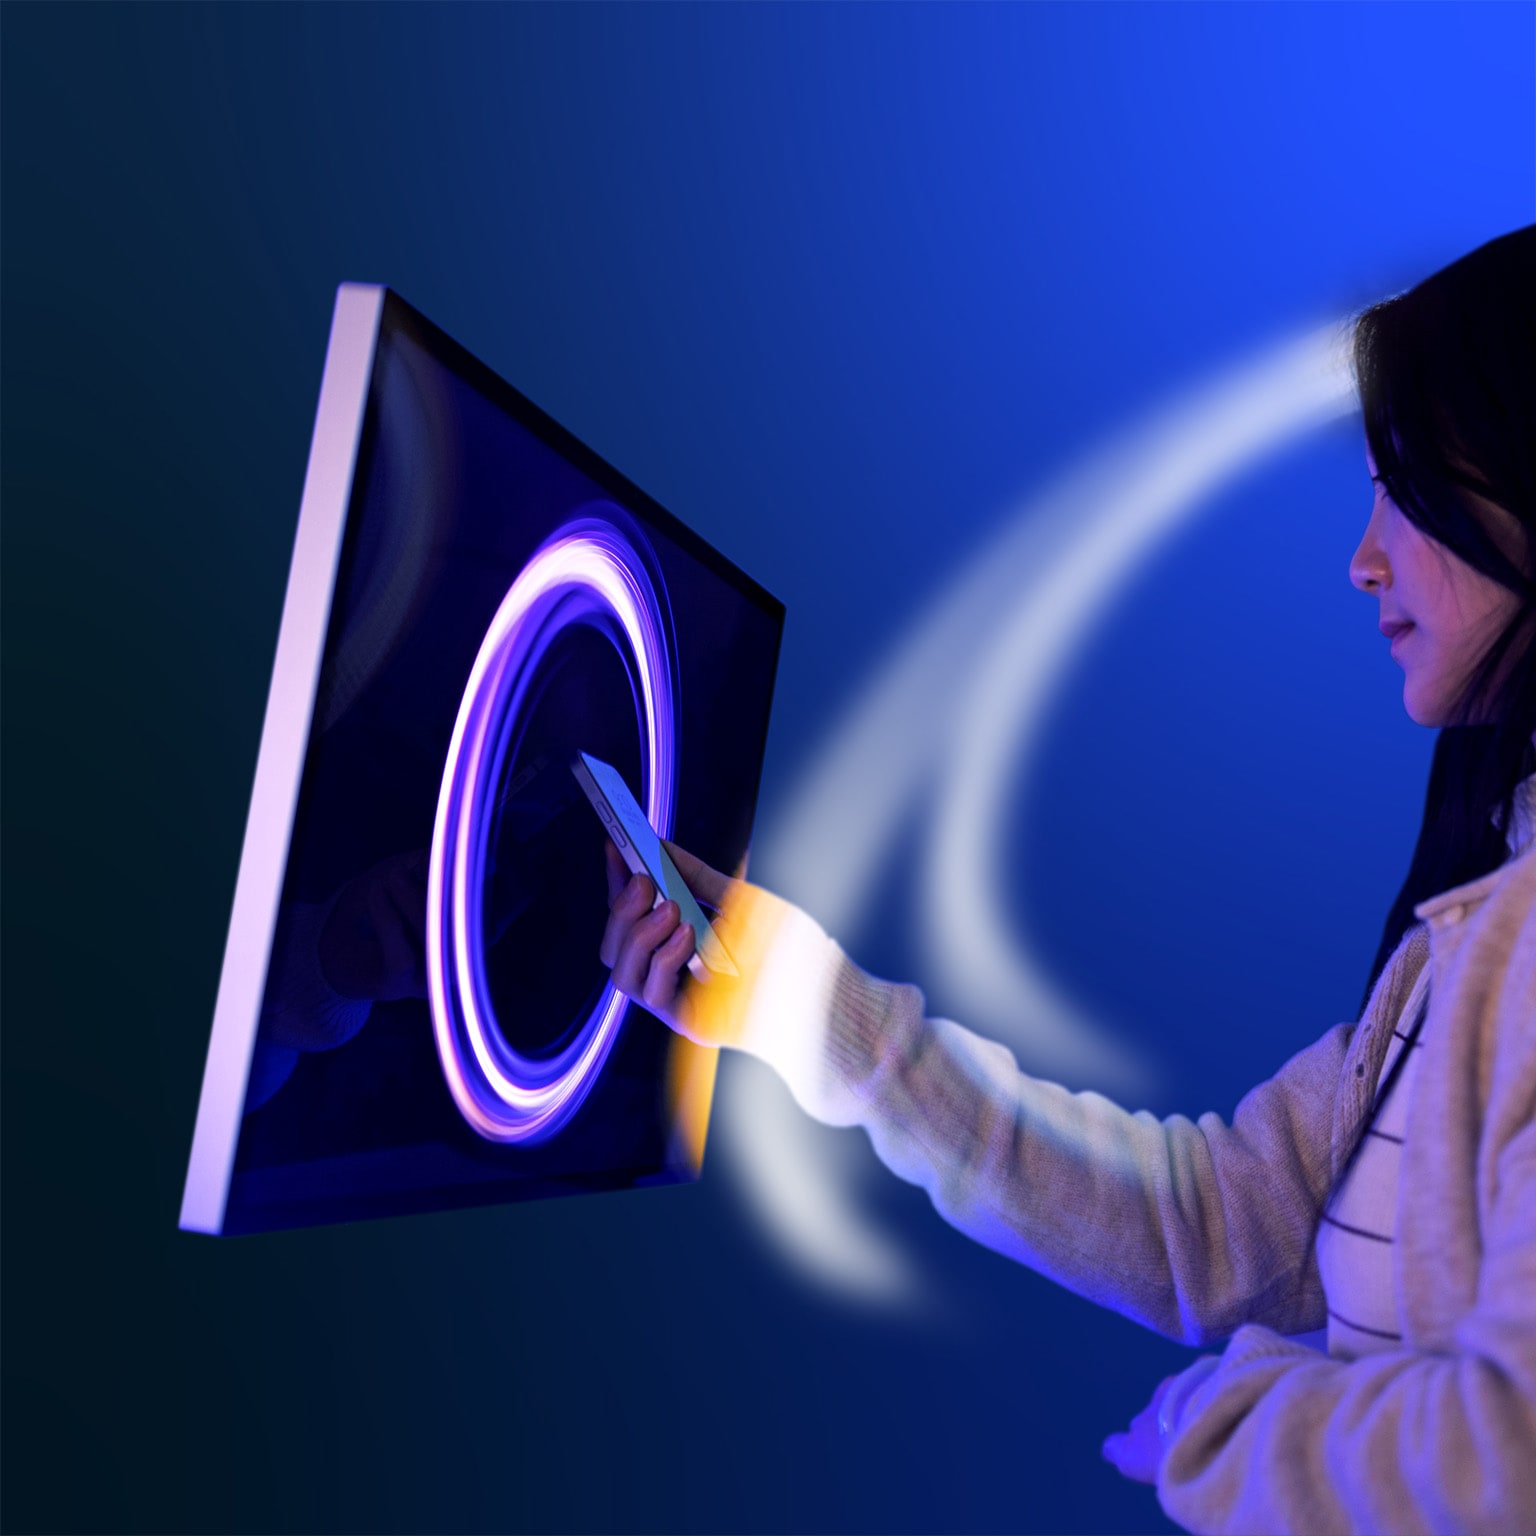 Woman interacting with circular patterned light swirling around and a screen with a similar light pattern displayed.